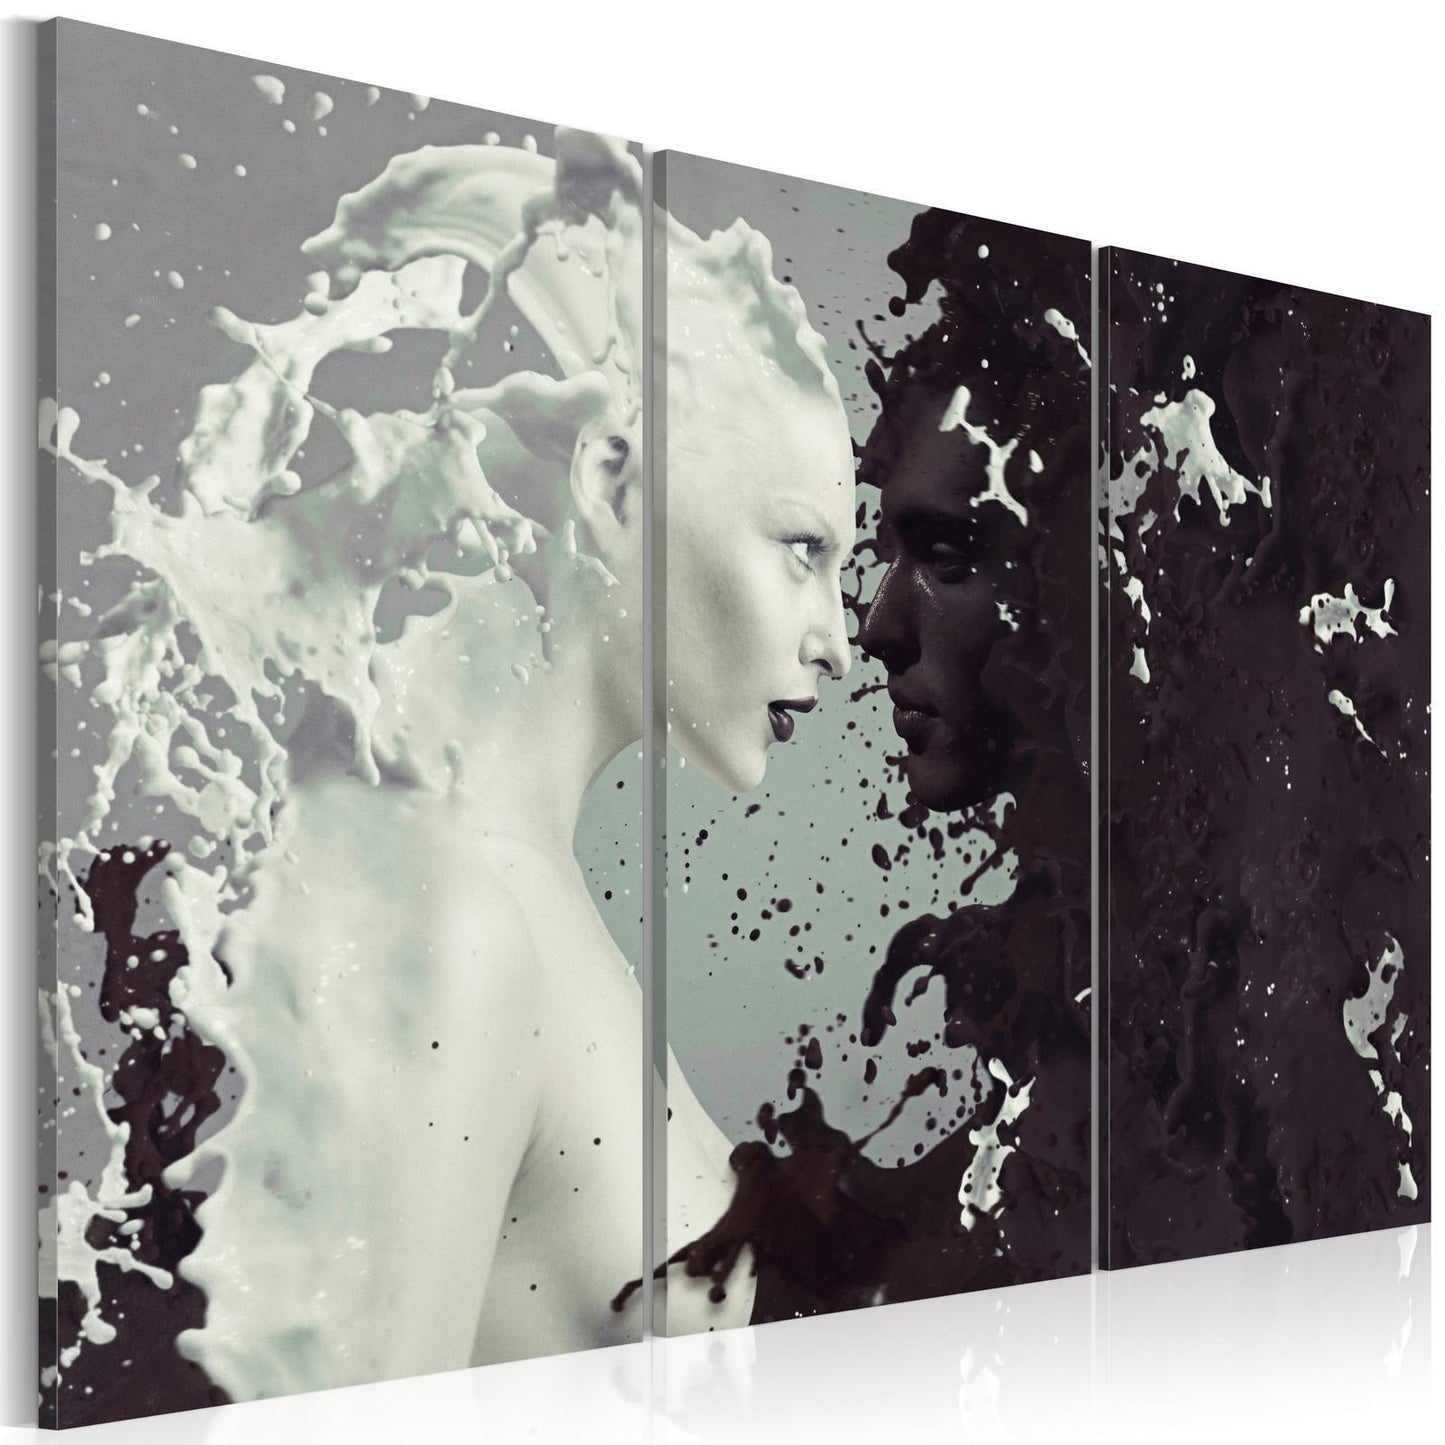 Painting - Black or white? - triptych